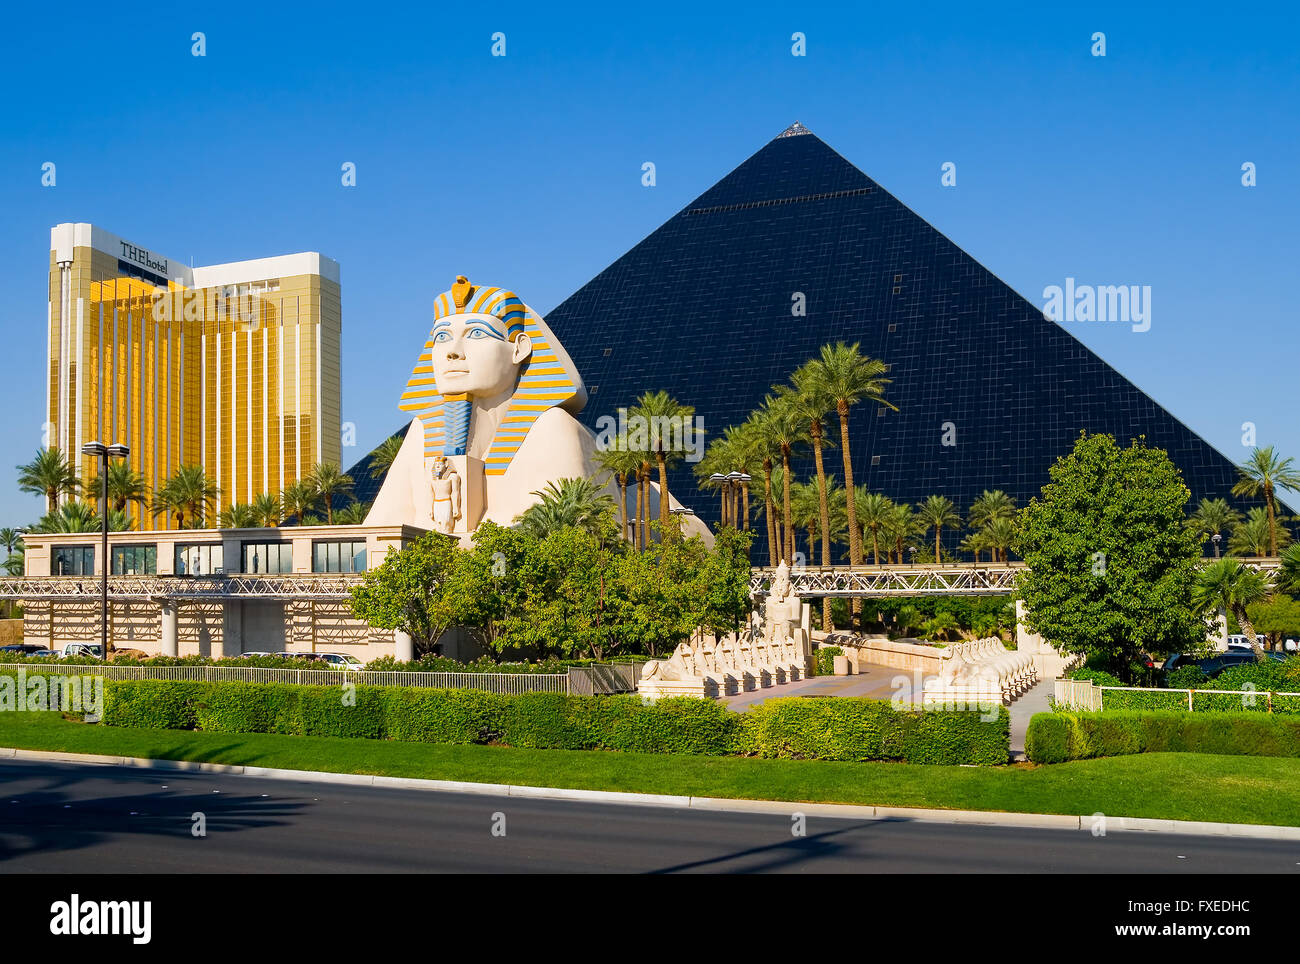 Pyramid Hotel and Sphinx in Las Vegas Stock Photo - Alamy